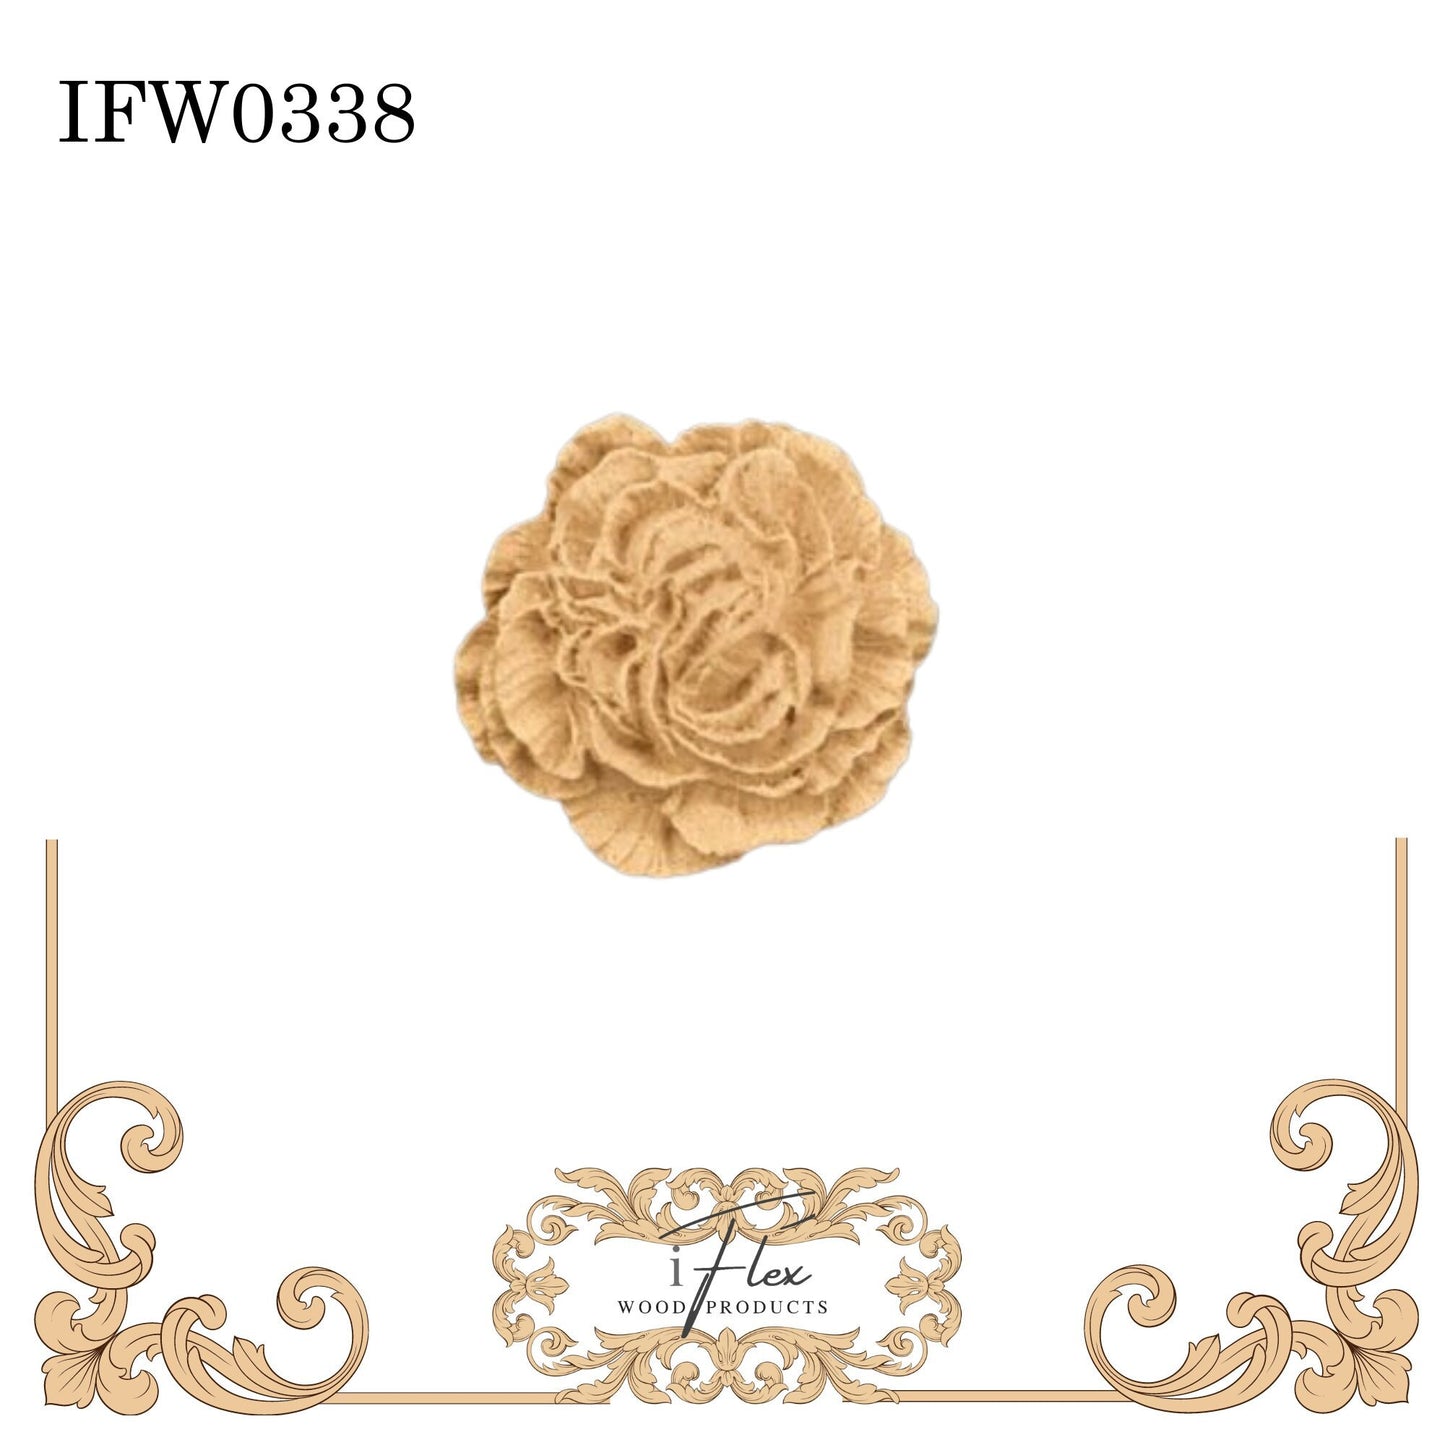 IFW 0338  iFlex Wood Products Flower bendable mouldings, flexible, wooden appliques